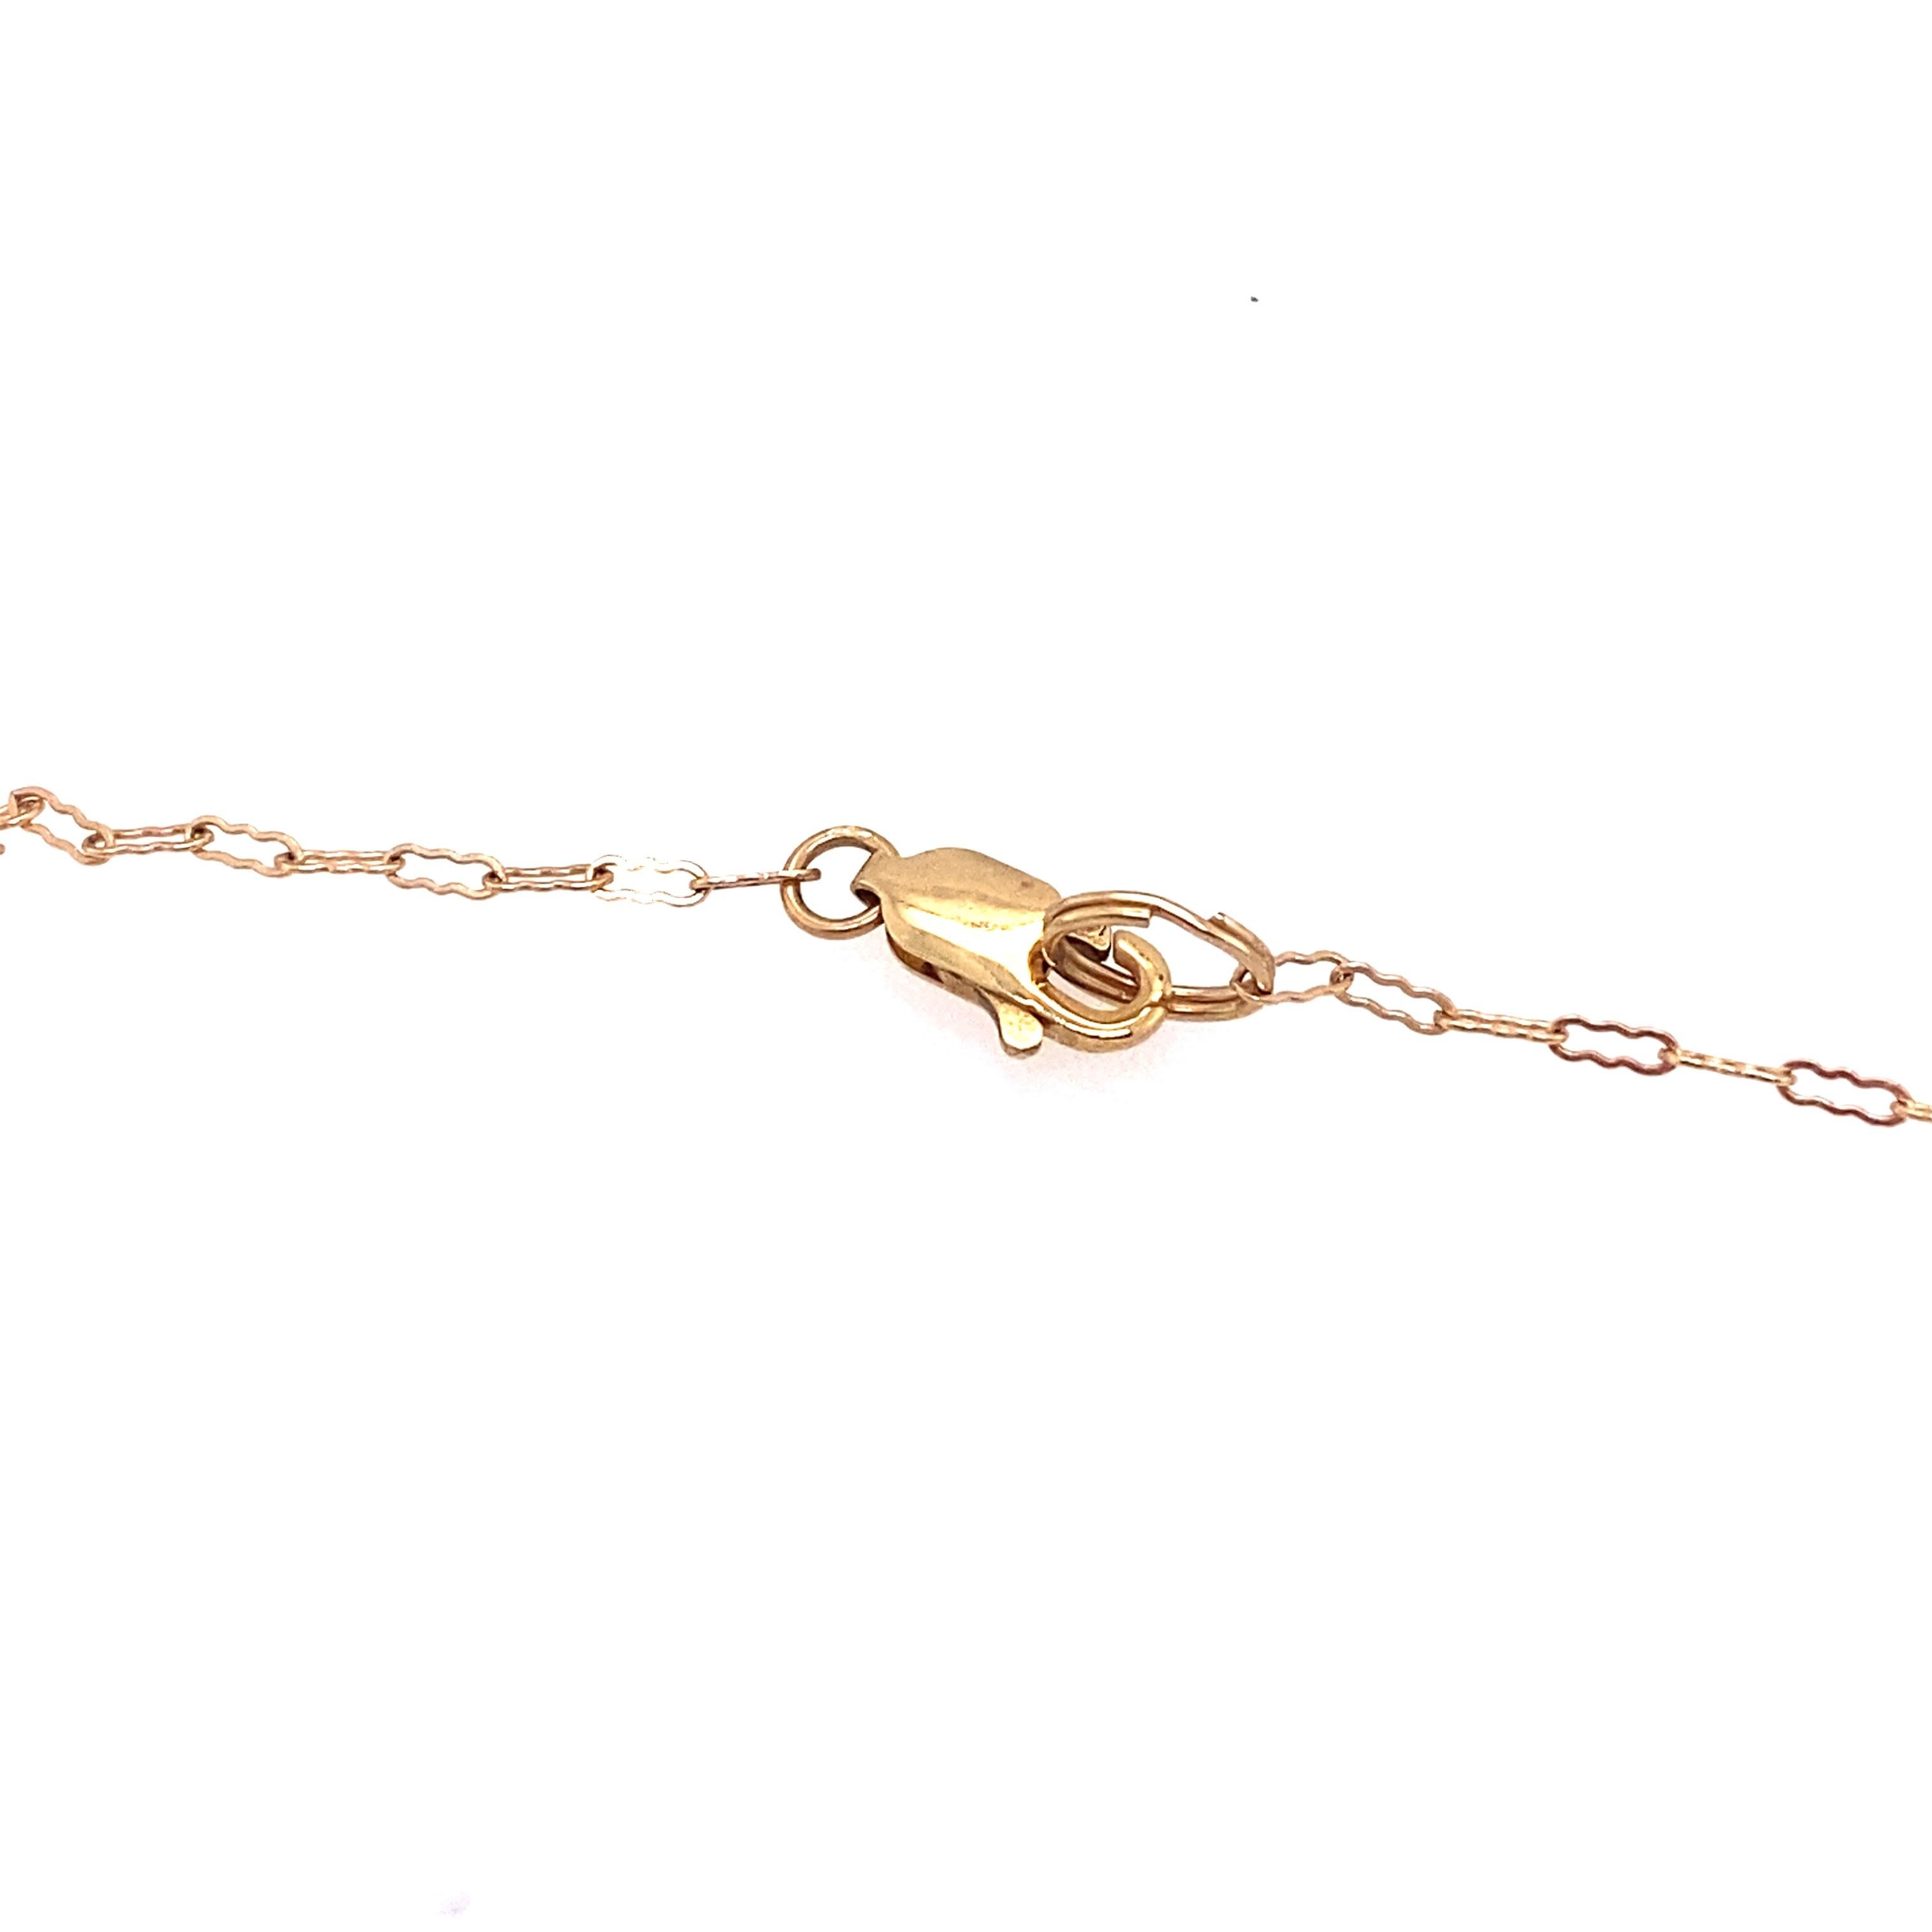 Circa: 1950s
Metal Type: 14 karat yellow gold
Weight: 5.7g
Dimensions: 18 inches L